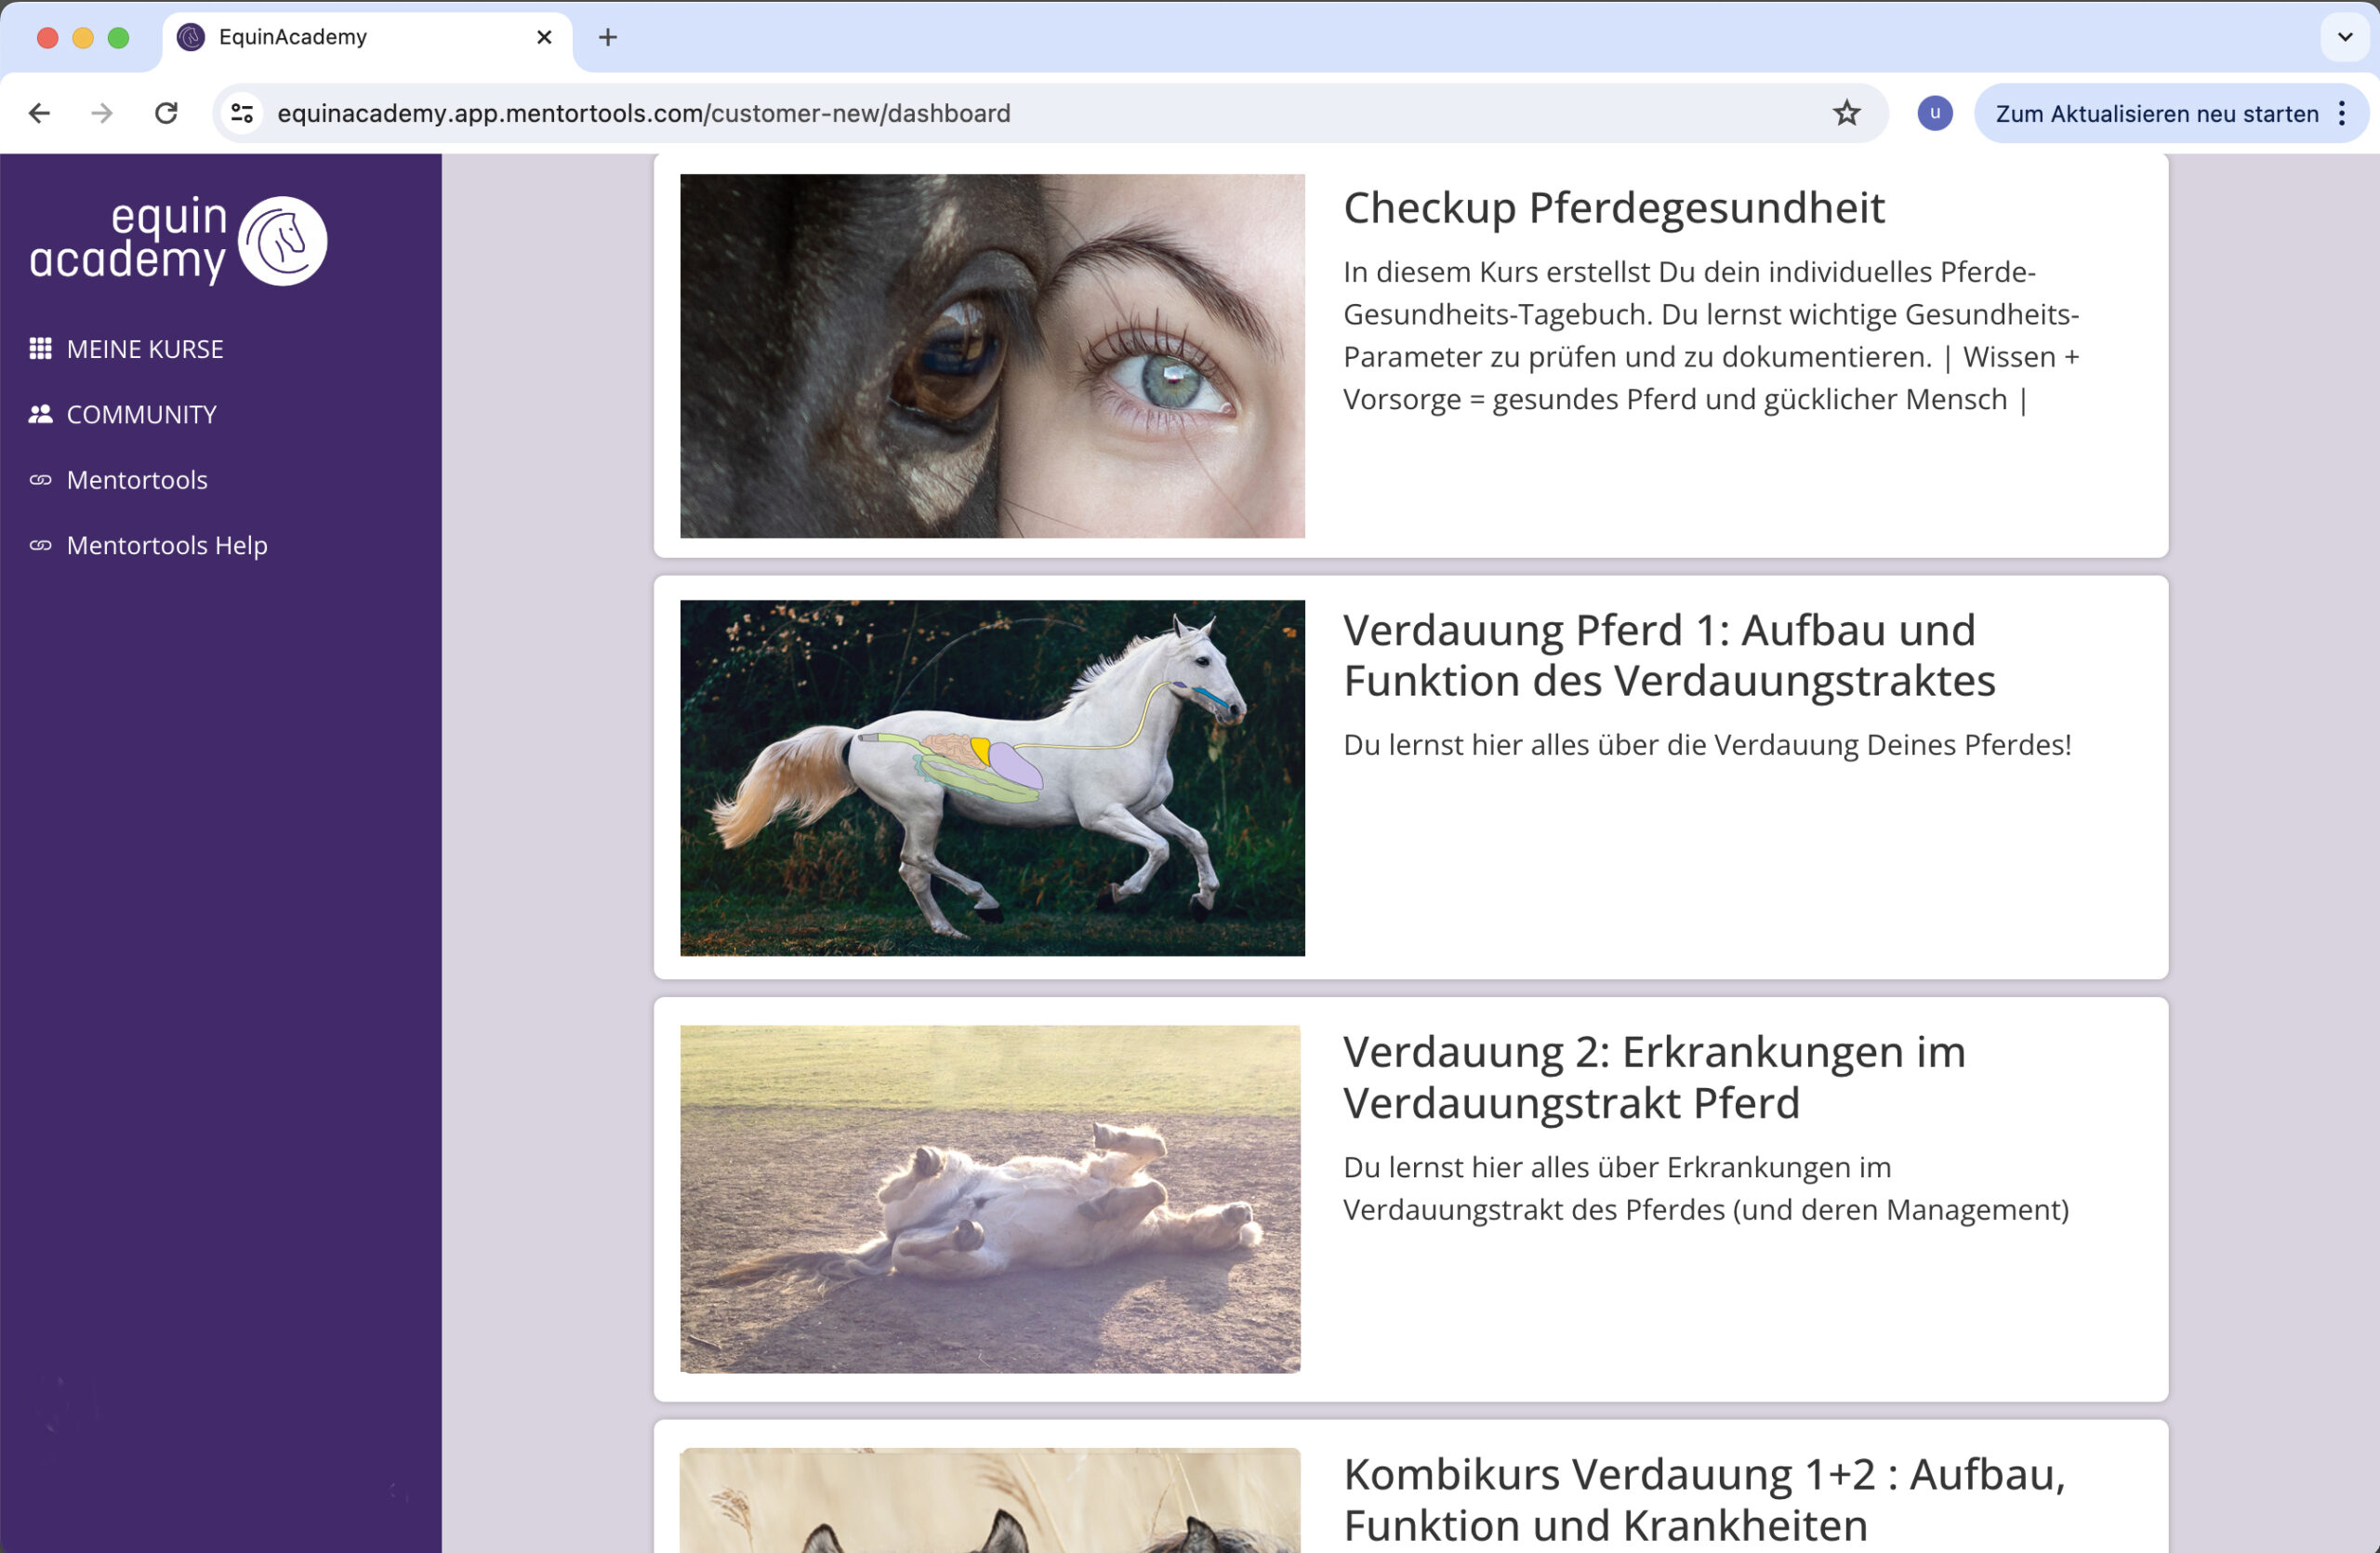 equin academy schulung